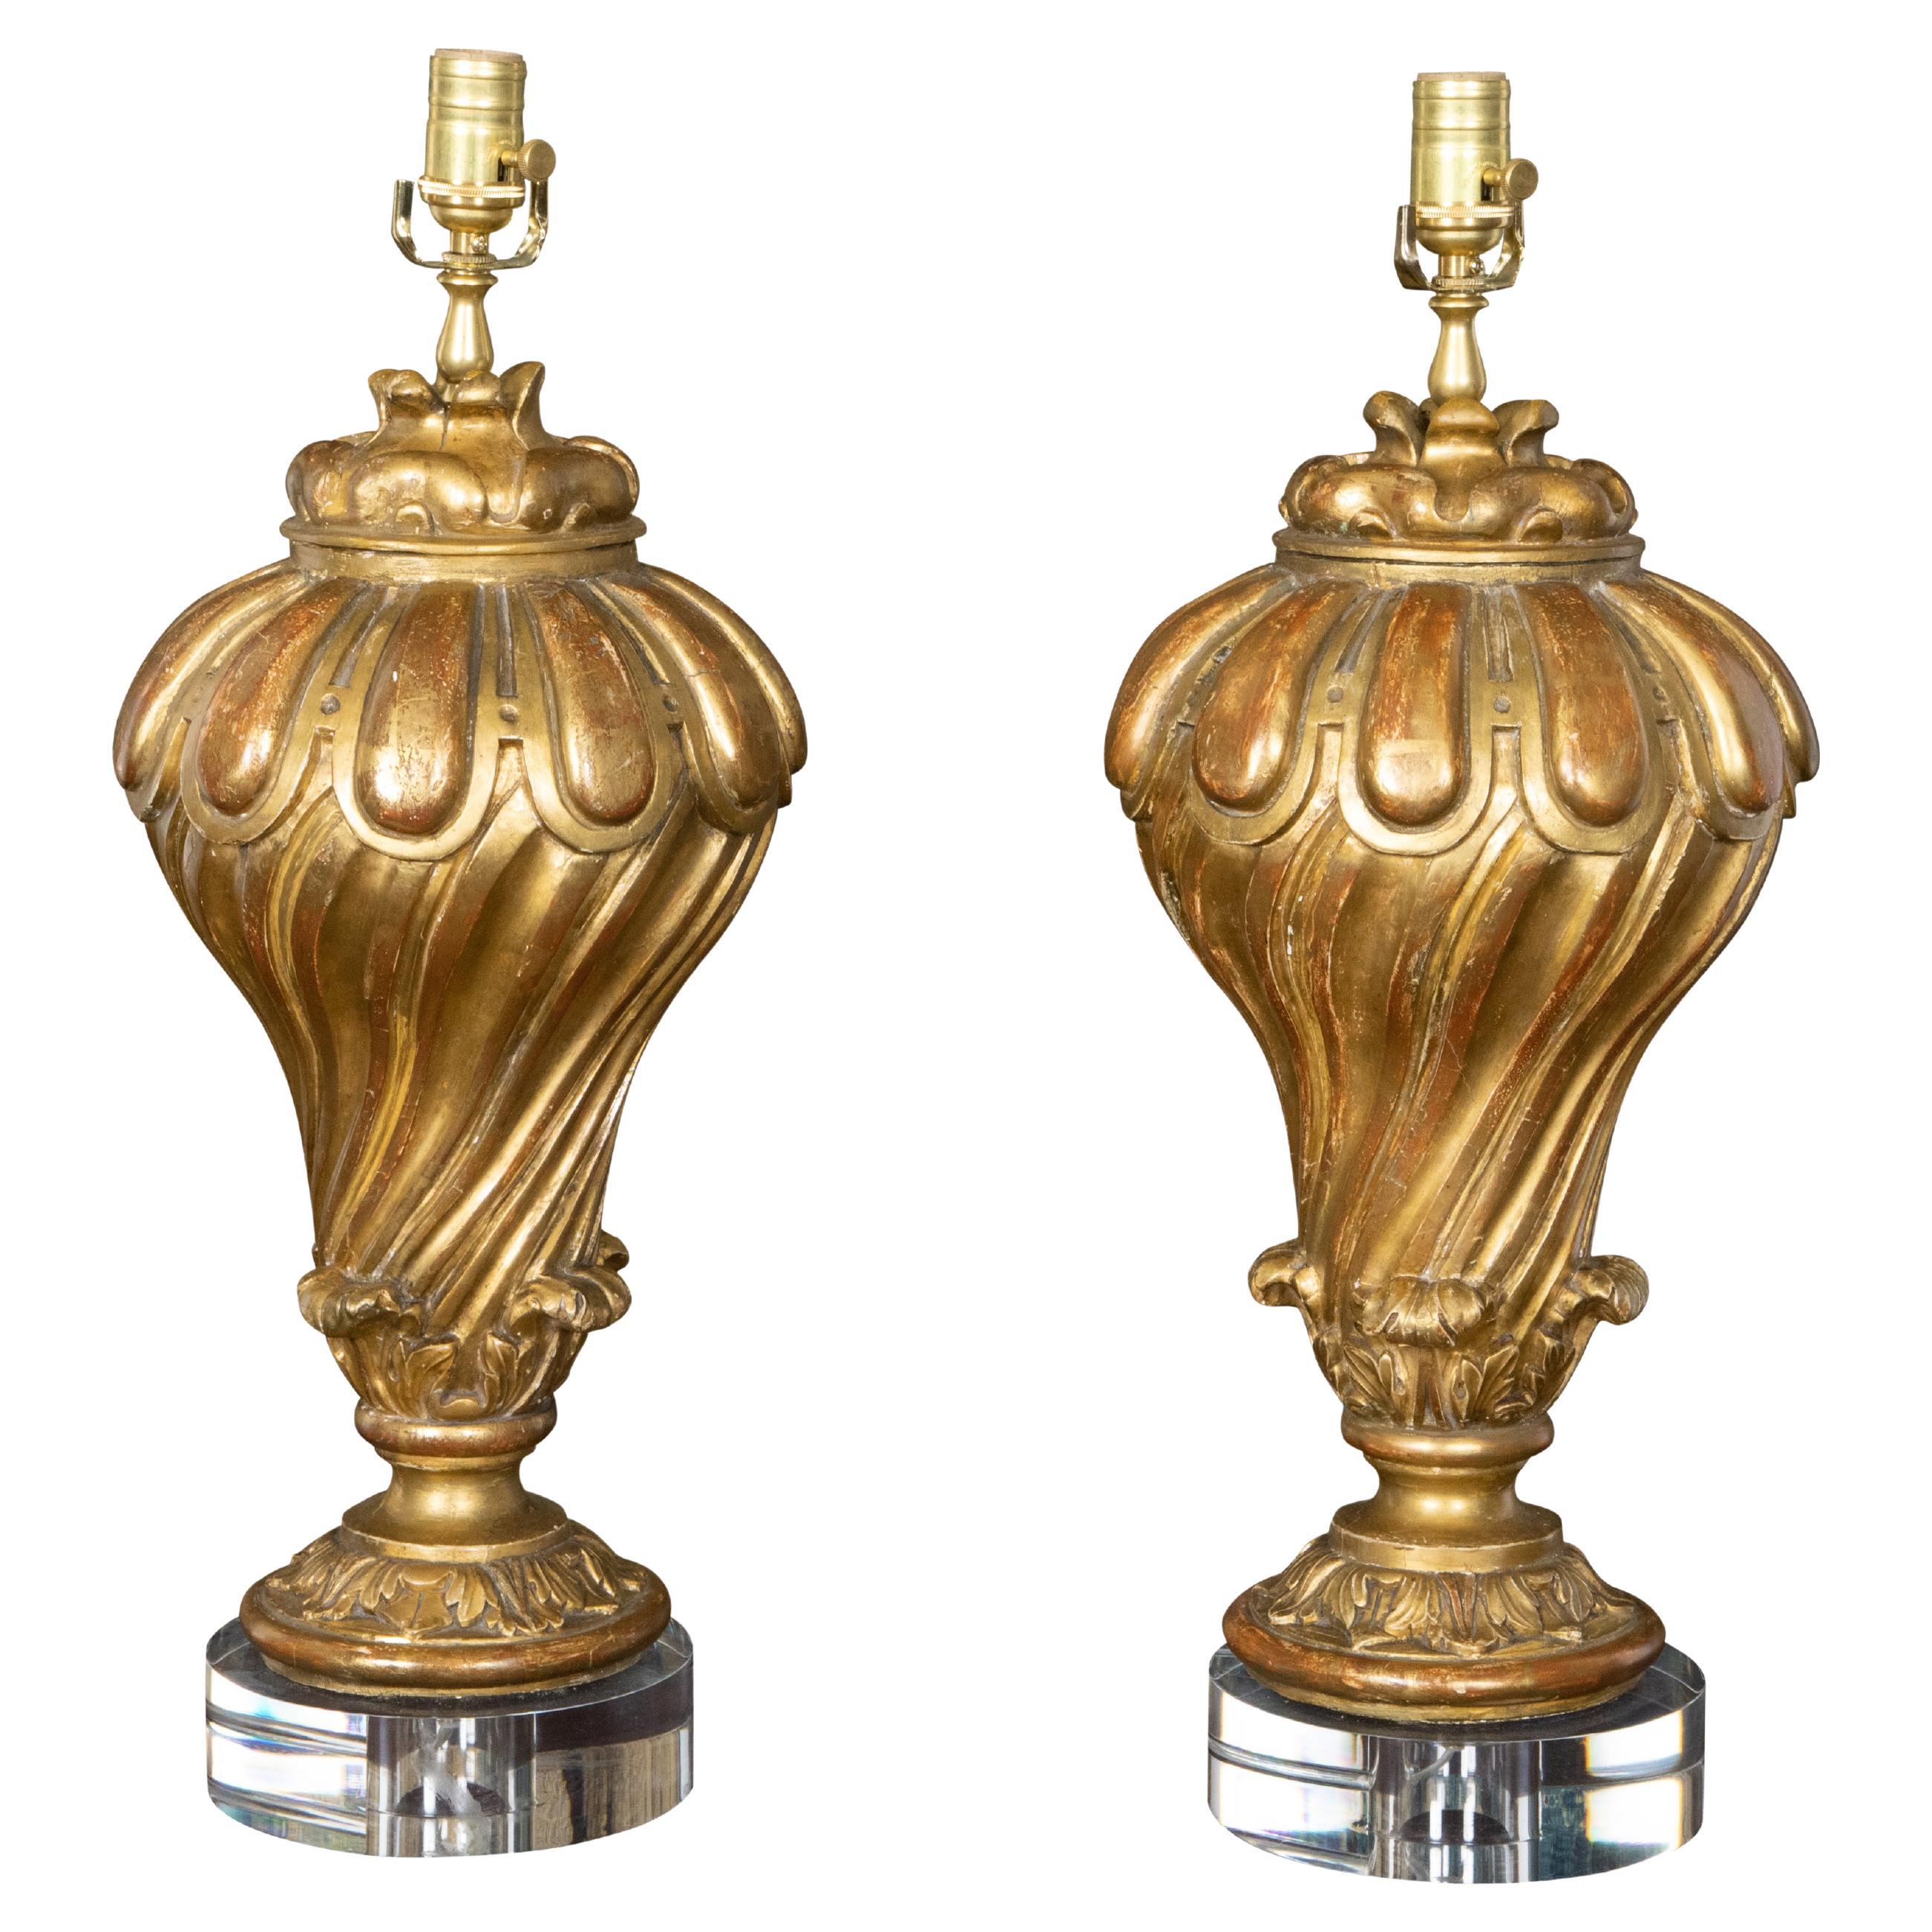 Pair of Italian 19th Century Carved Giltwood Fragments Made into Lamps on Lucite